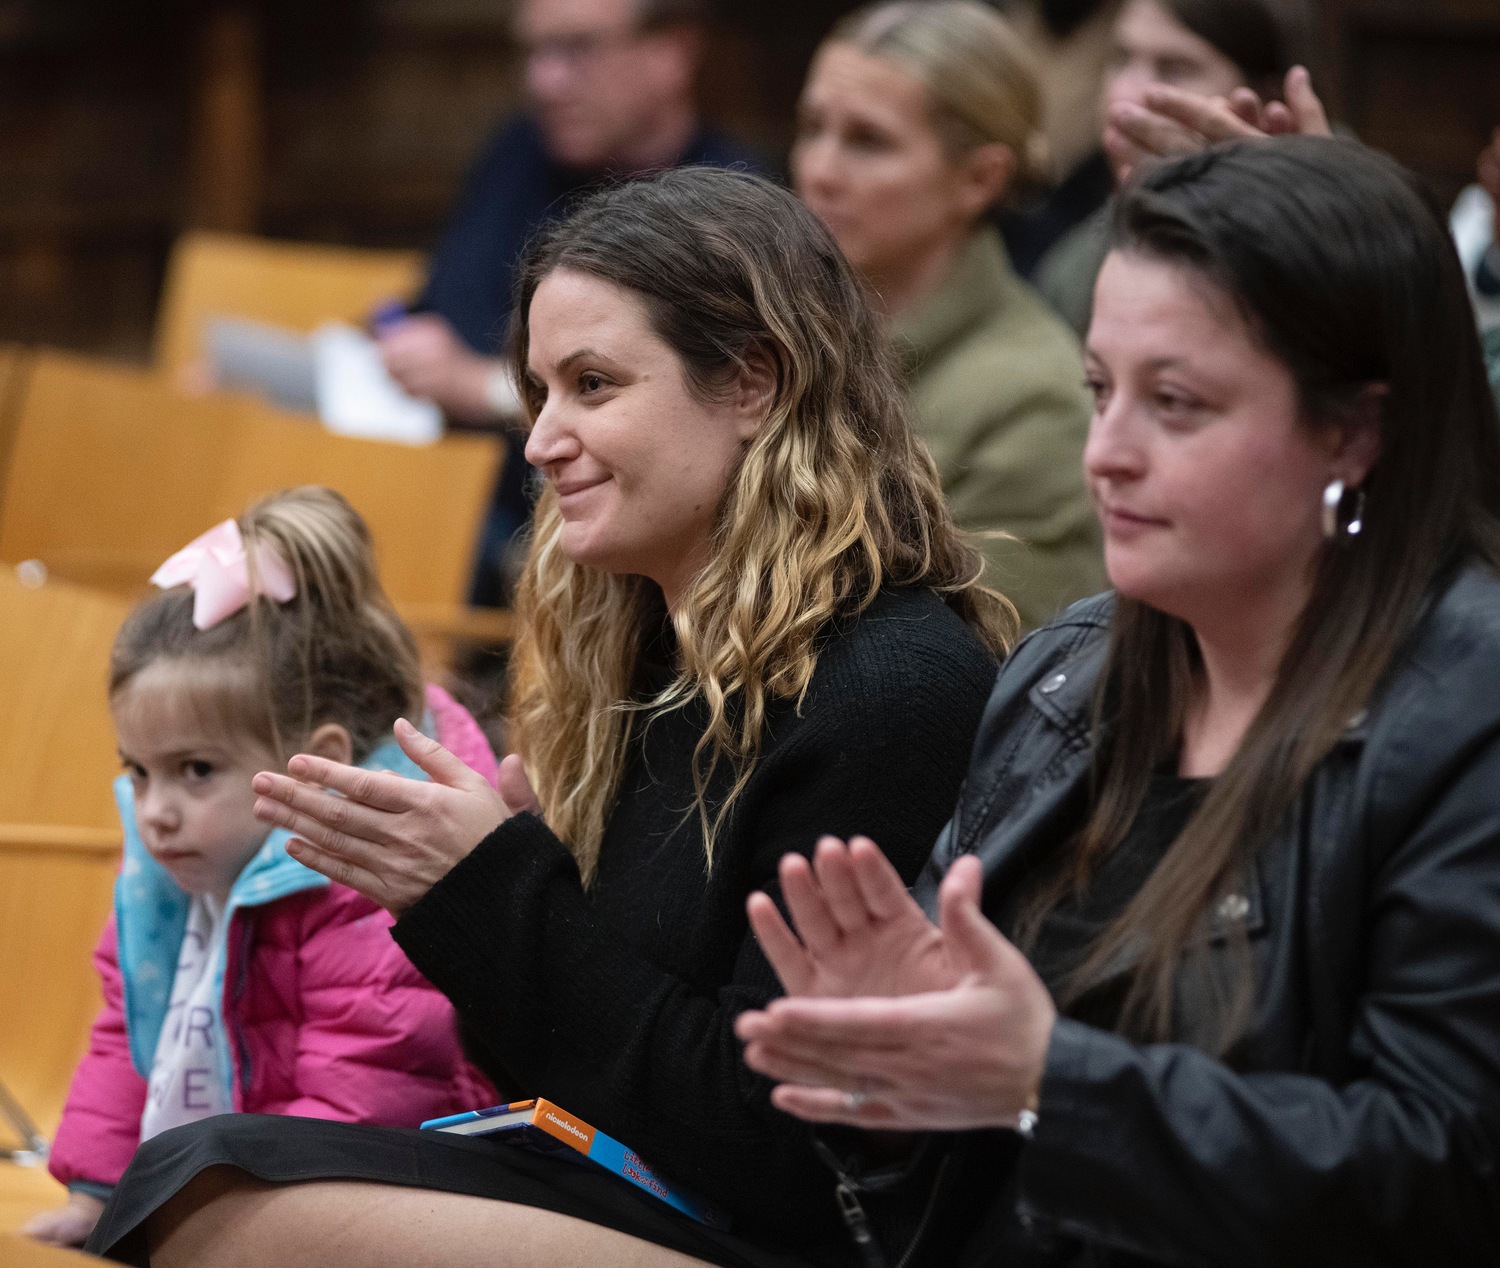 Montauk parents pleaded with the East Hampton Town Board to subsidize or take over the daycare program at the Montauk Playhouse to ensure that daycare services are maintained in the hamlet. DOUG KUNTZ PHOTOS